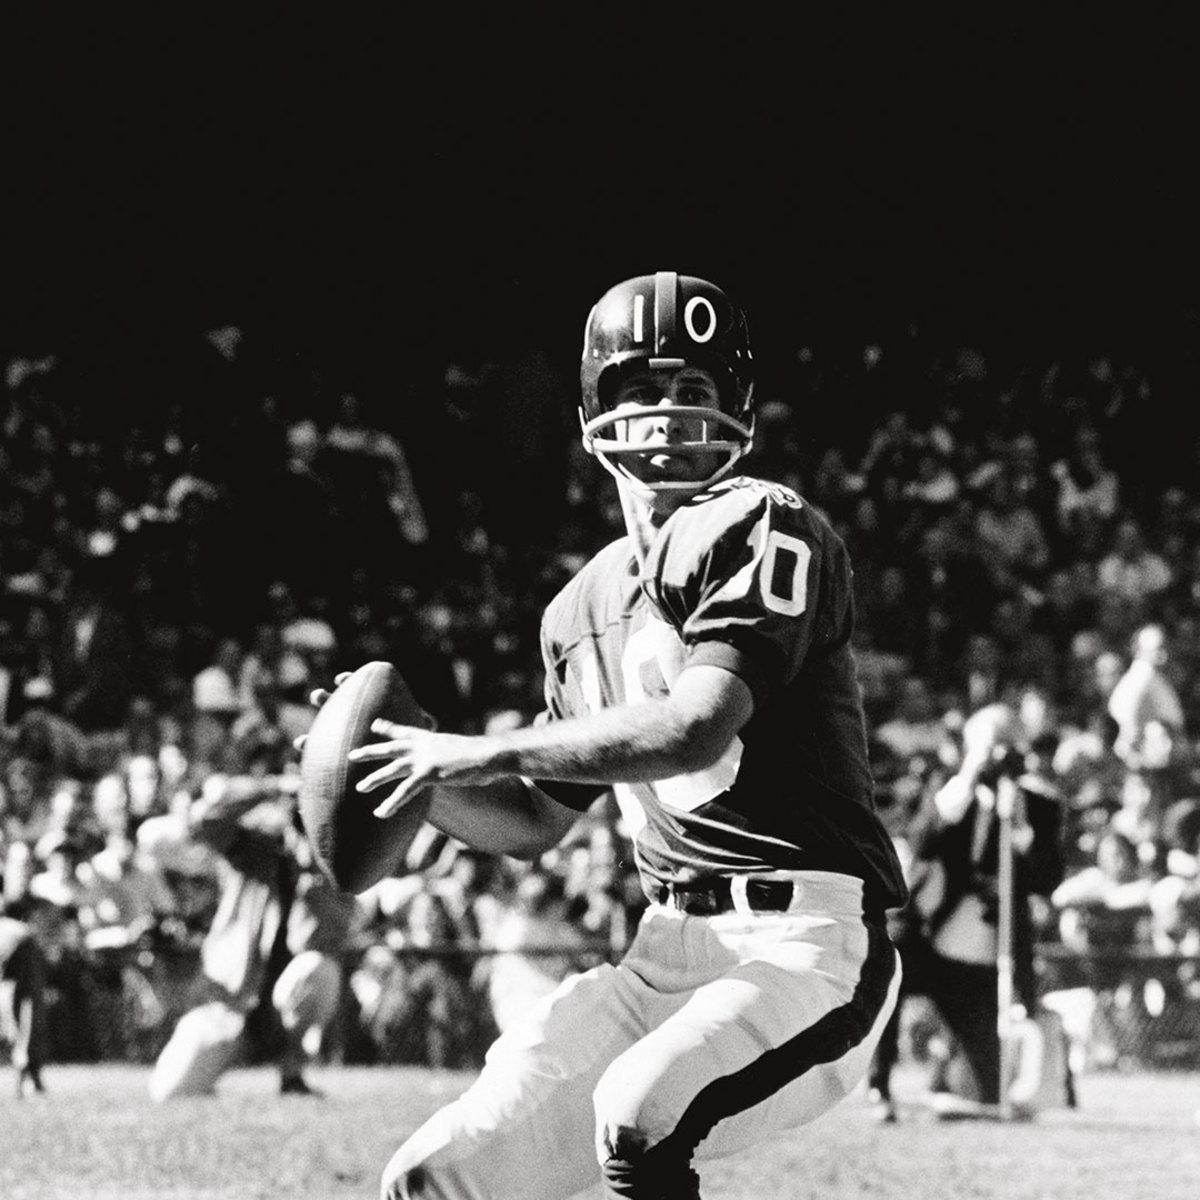 Black and white photo of football player about to throw ball